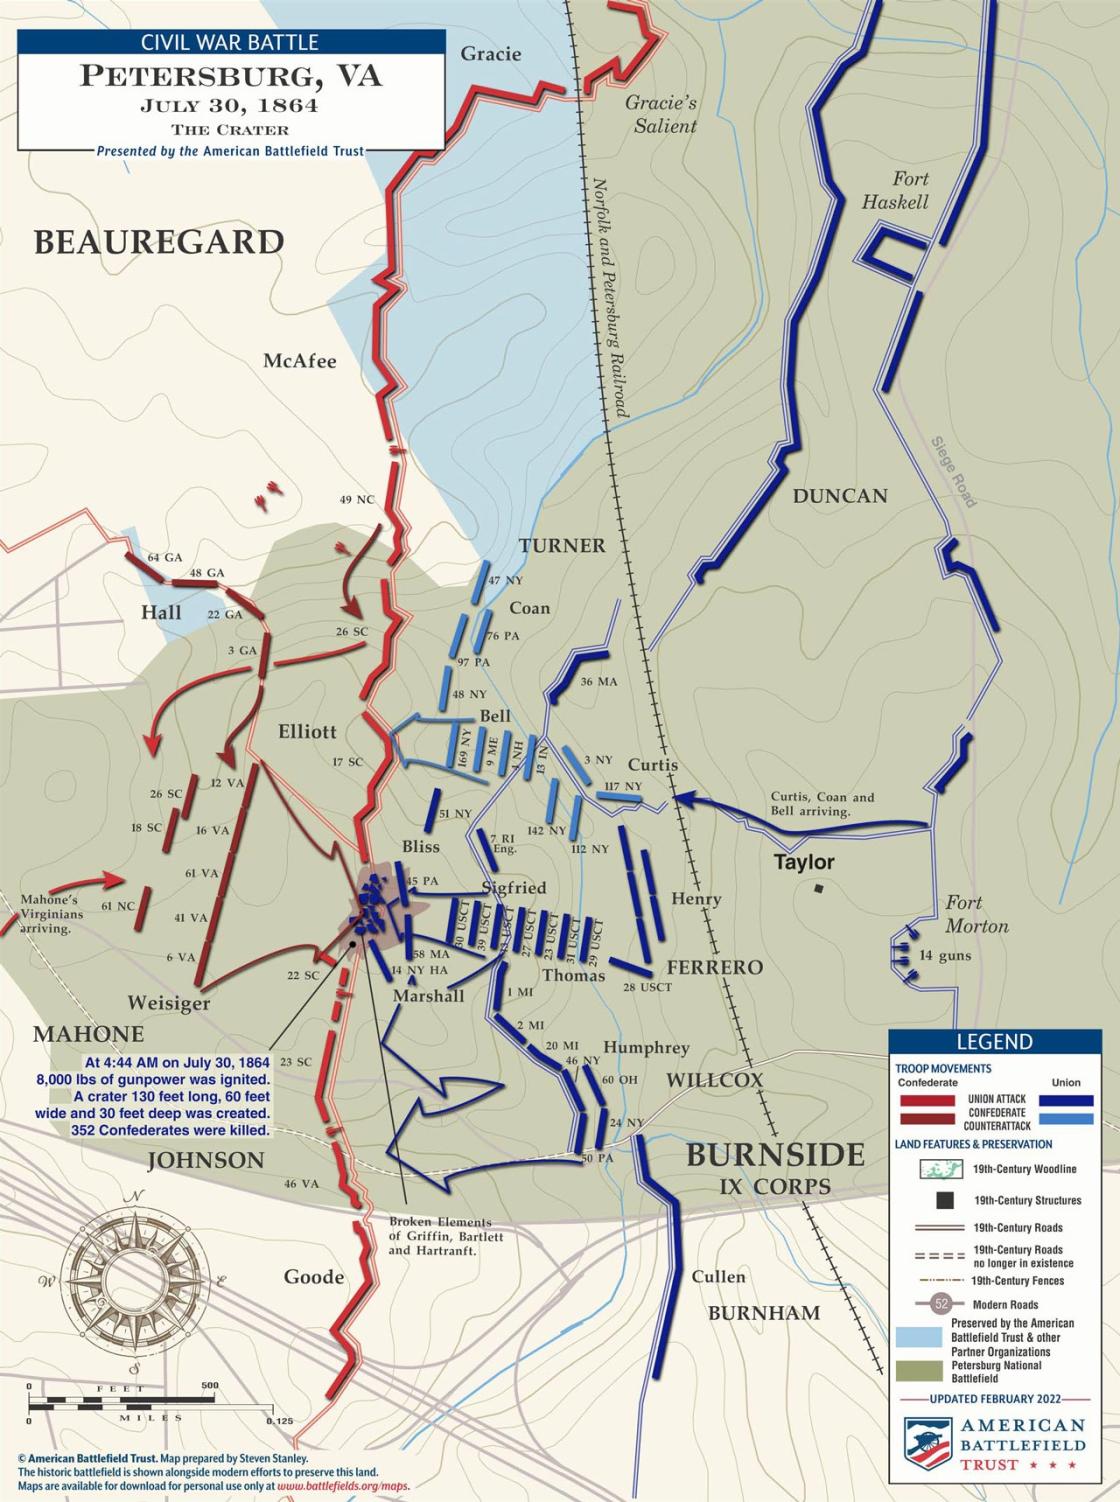 Petersburg | The Crater | July 30, 1864 (February 2022)